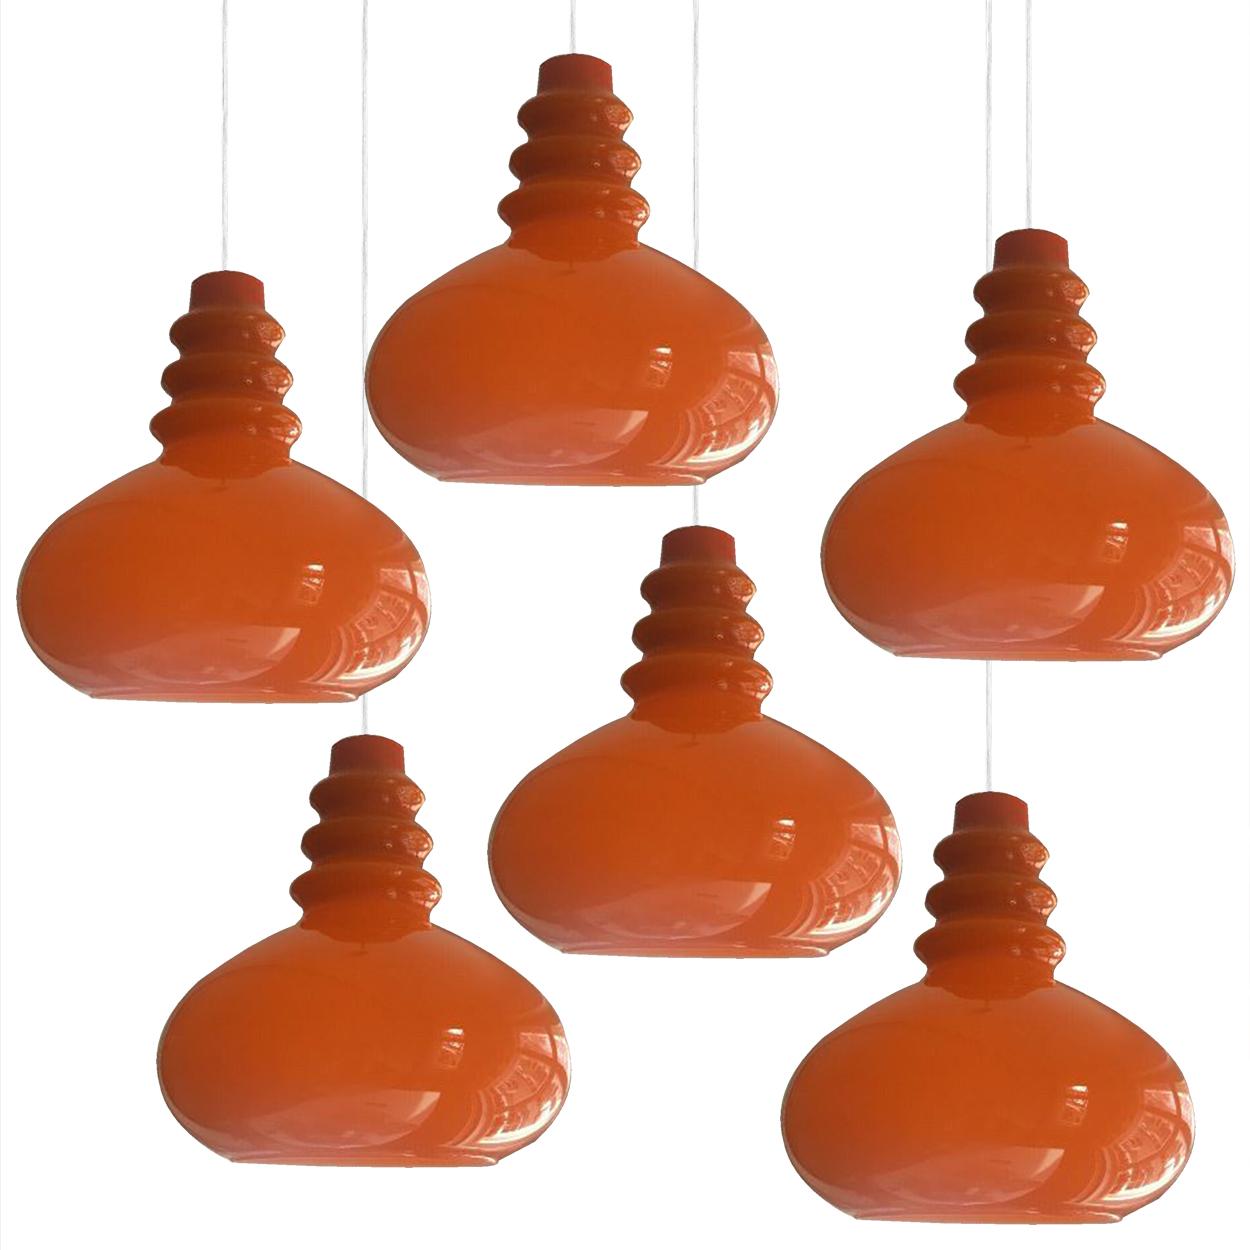 There’s something about orange that screams this particular era. And this 1970s pair of Peil & Putzler ceiling pendant lamps is very orange! Image 1 is the lamp with the light on.

The lovely shaped lampshade is made of a ‘cast opaque orange